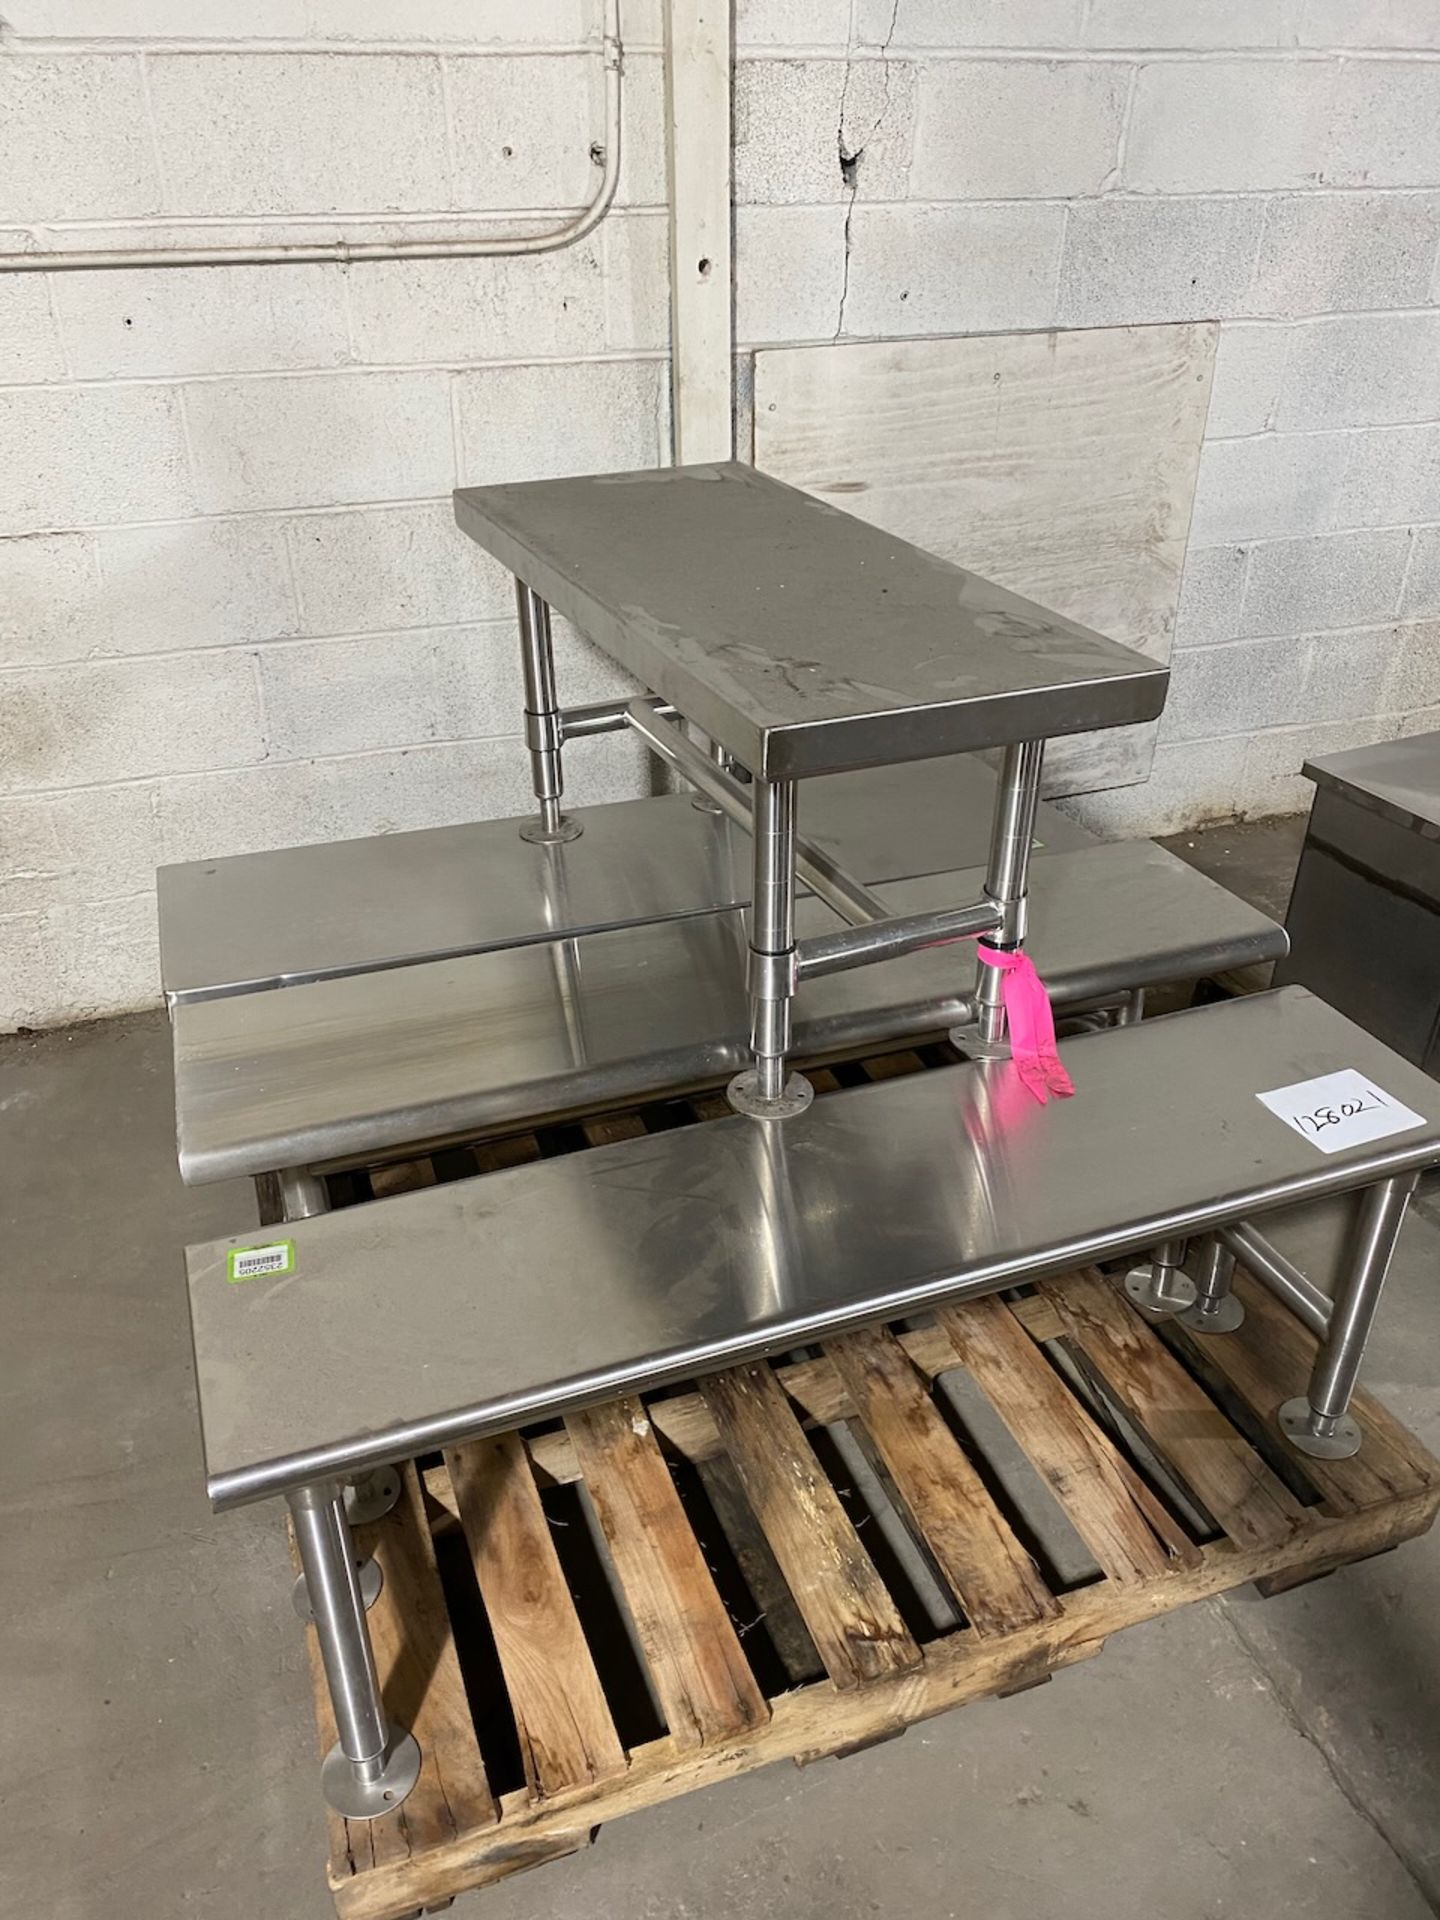 Pallet of Stainless Steel Lab Benches. - Image 2 of 2